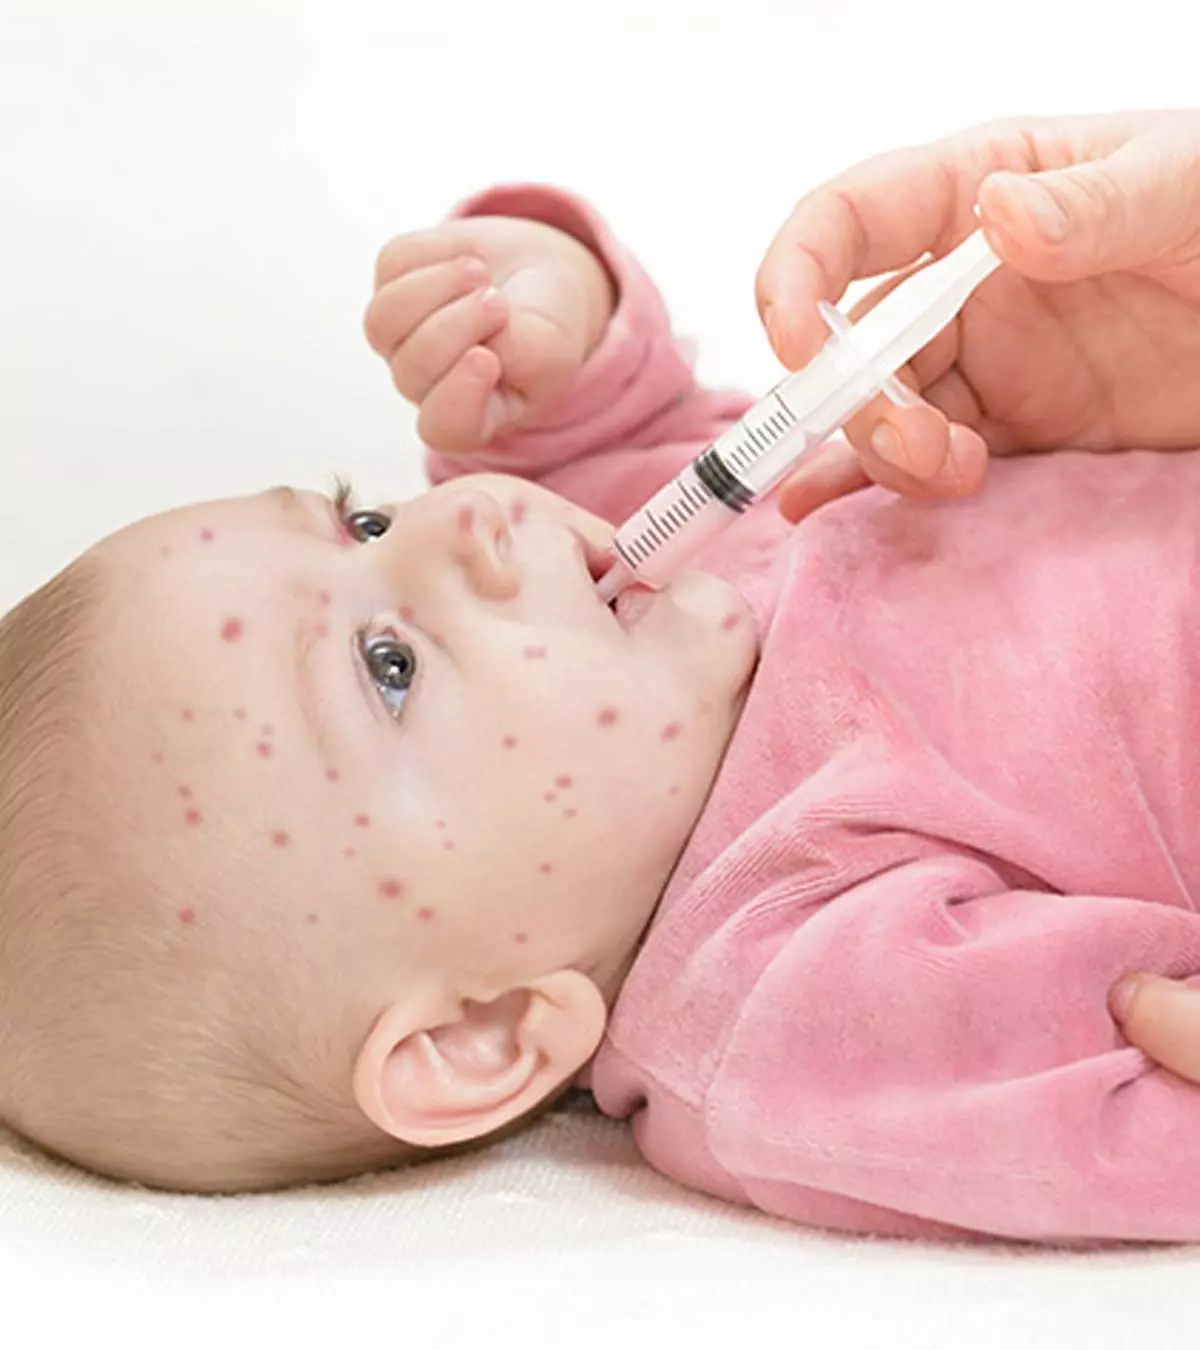 Measles In Babies - Causes, Symptoms And Treatment